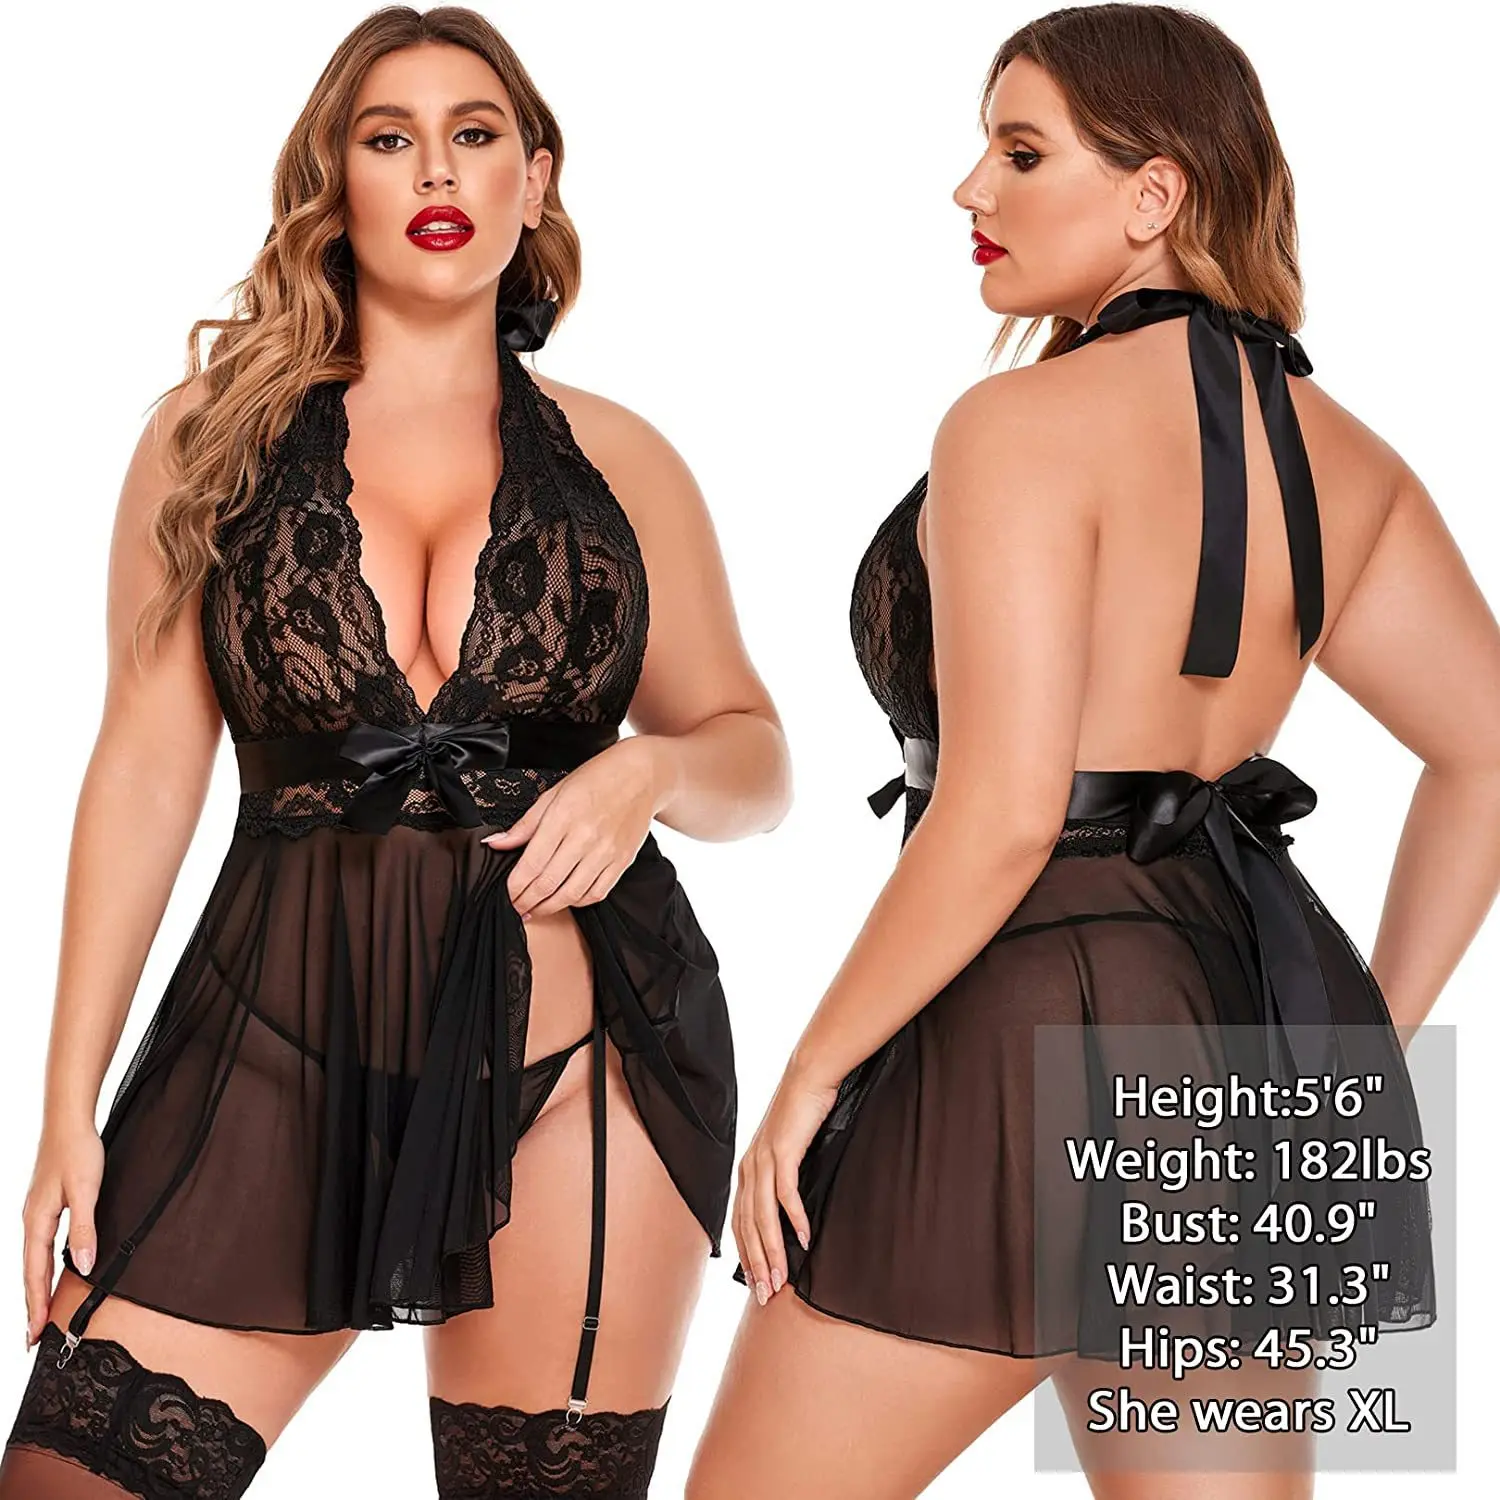 

New In Sexy Lingerie For Woman Transparent Porno Sexual Clothing Babydoll Lace Teddy Dress Erotic Underwear Crotchless Sleepwear